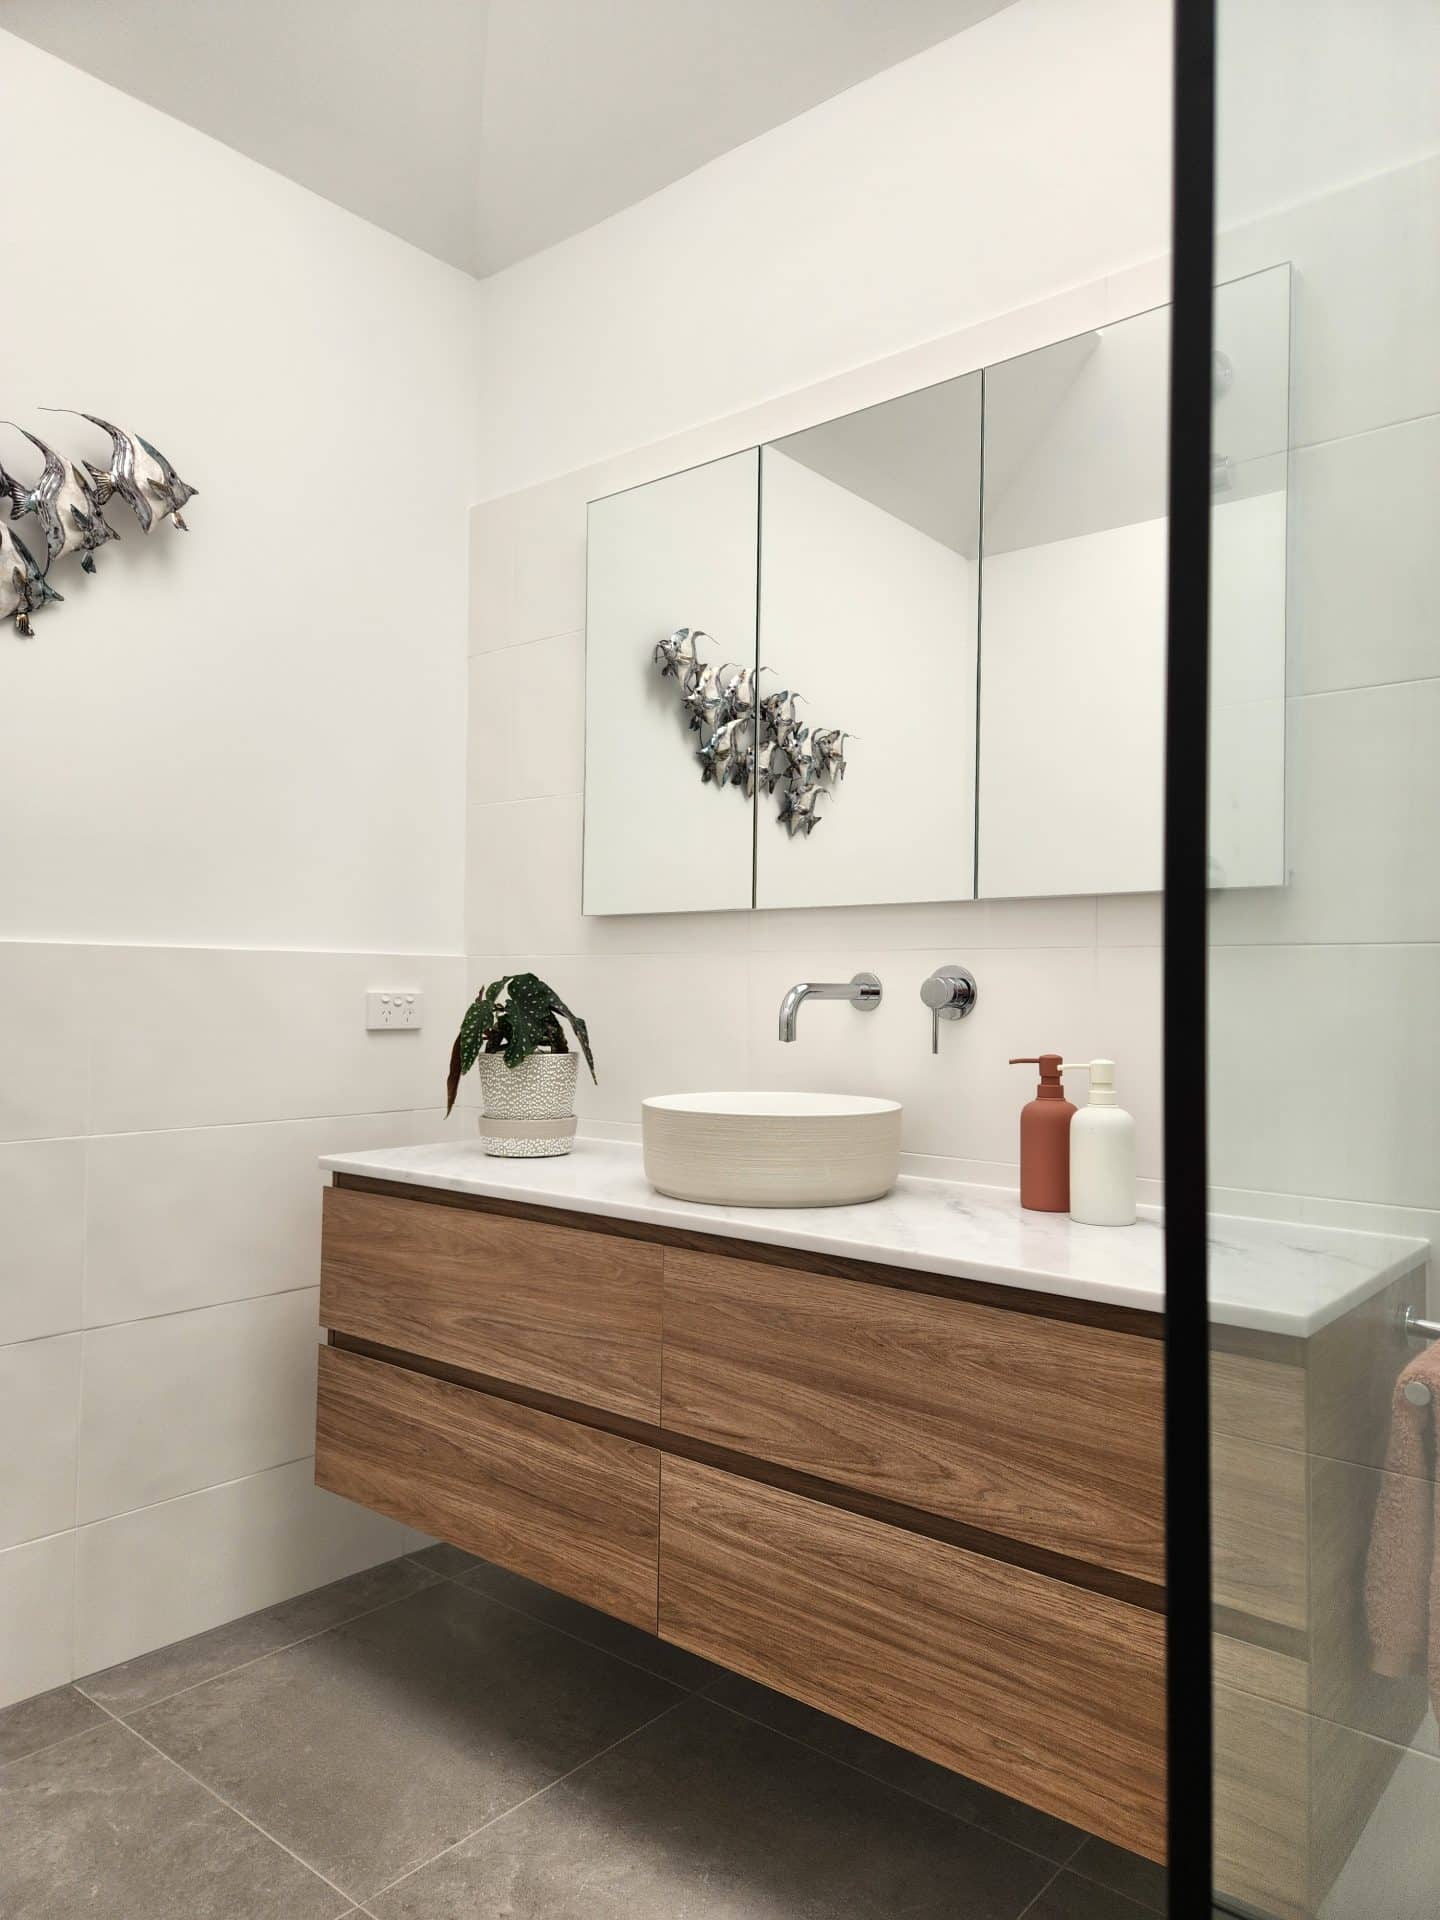 A modern bathroom with wooden cabinets and a glass shower undergoes renovations.